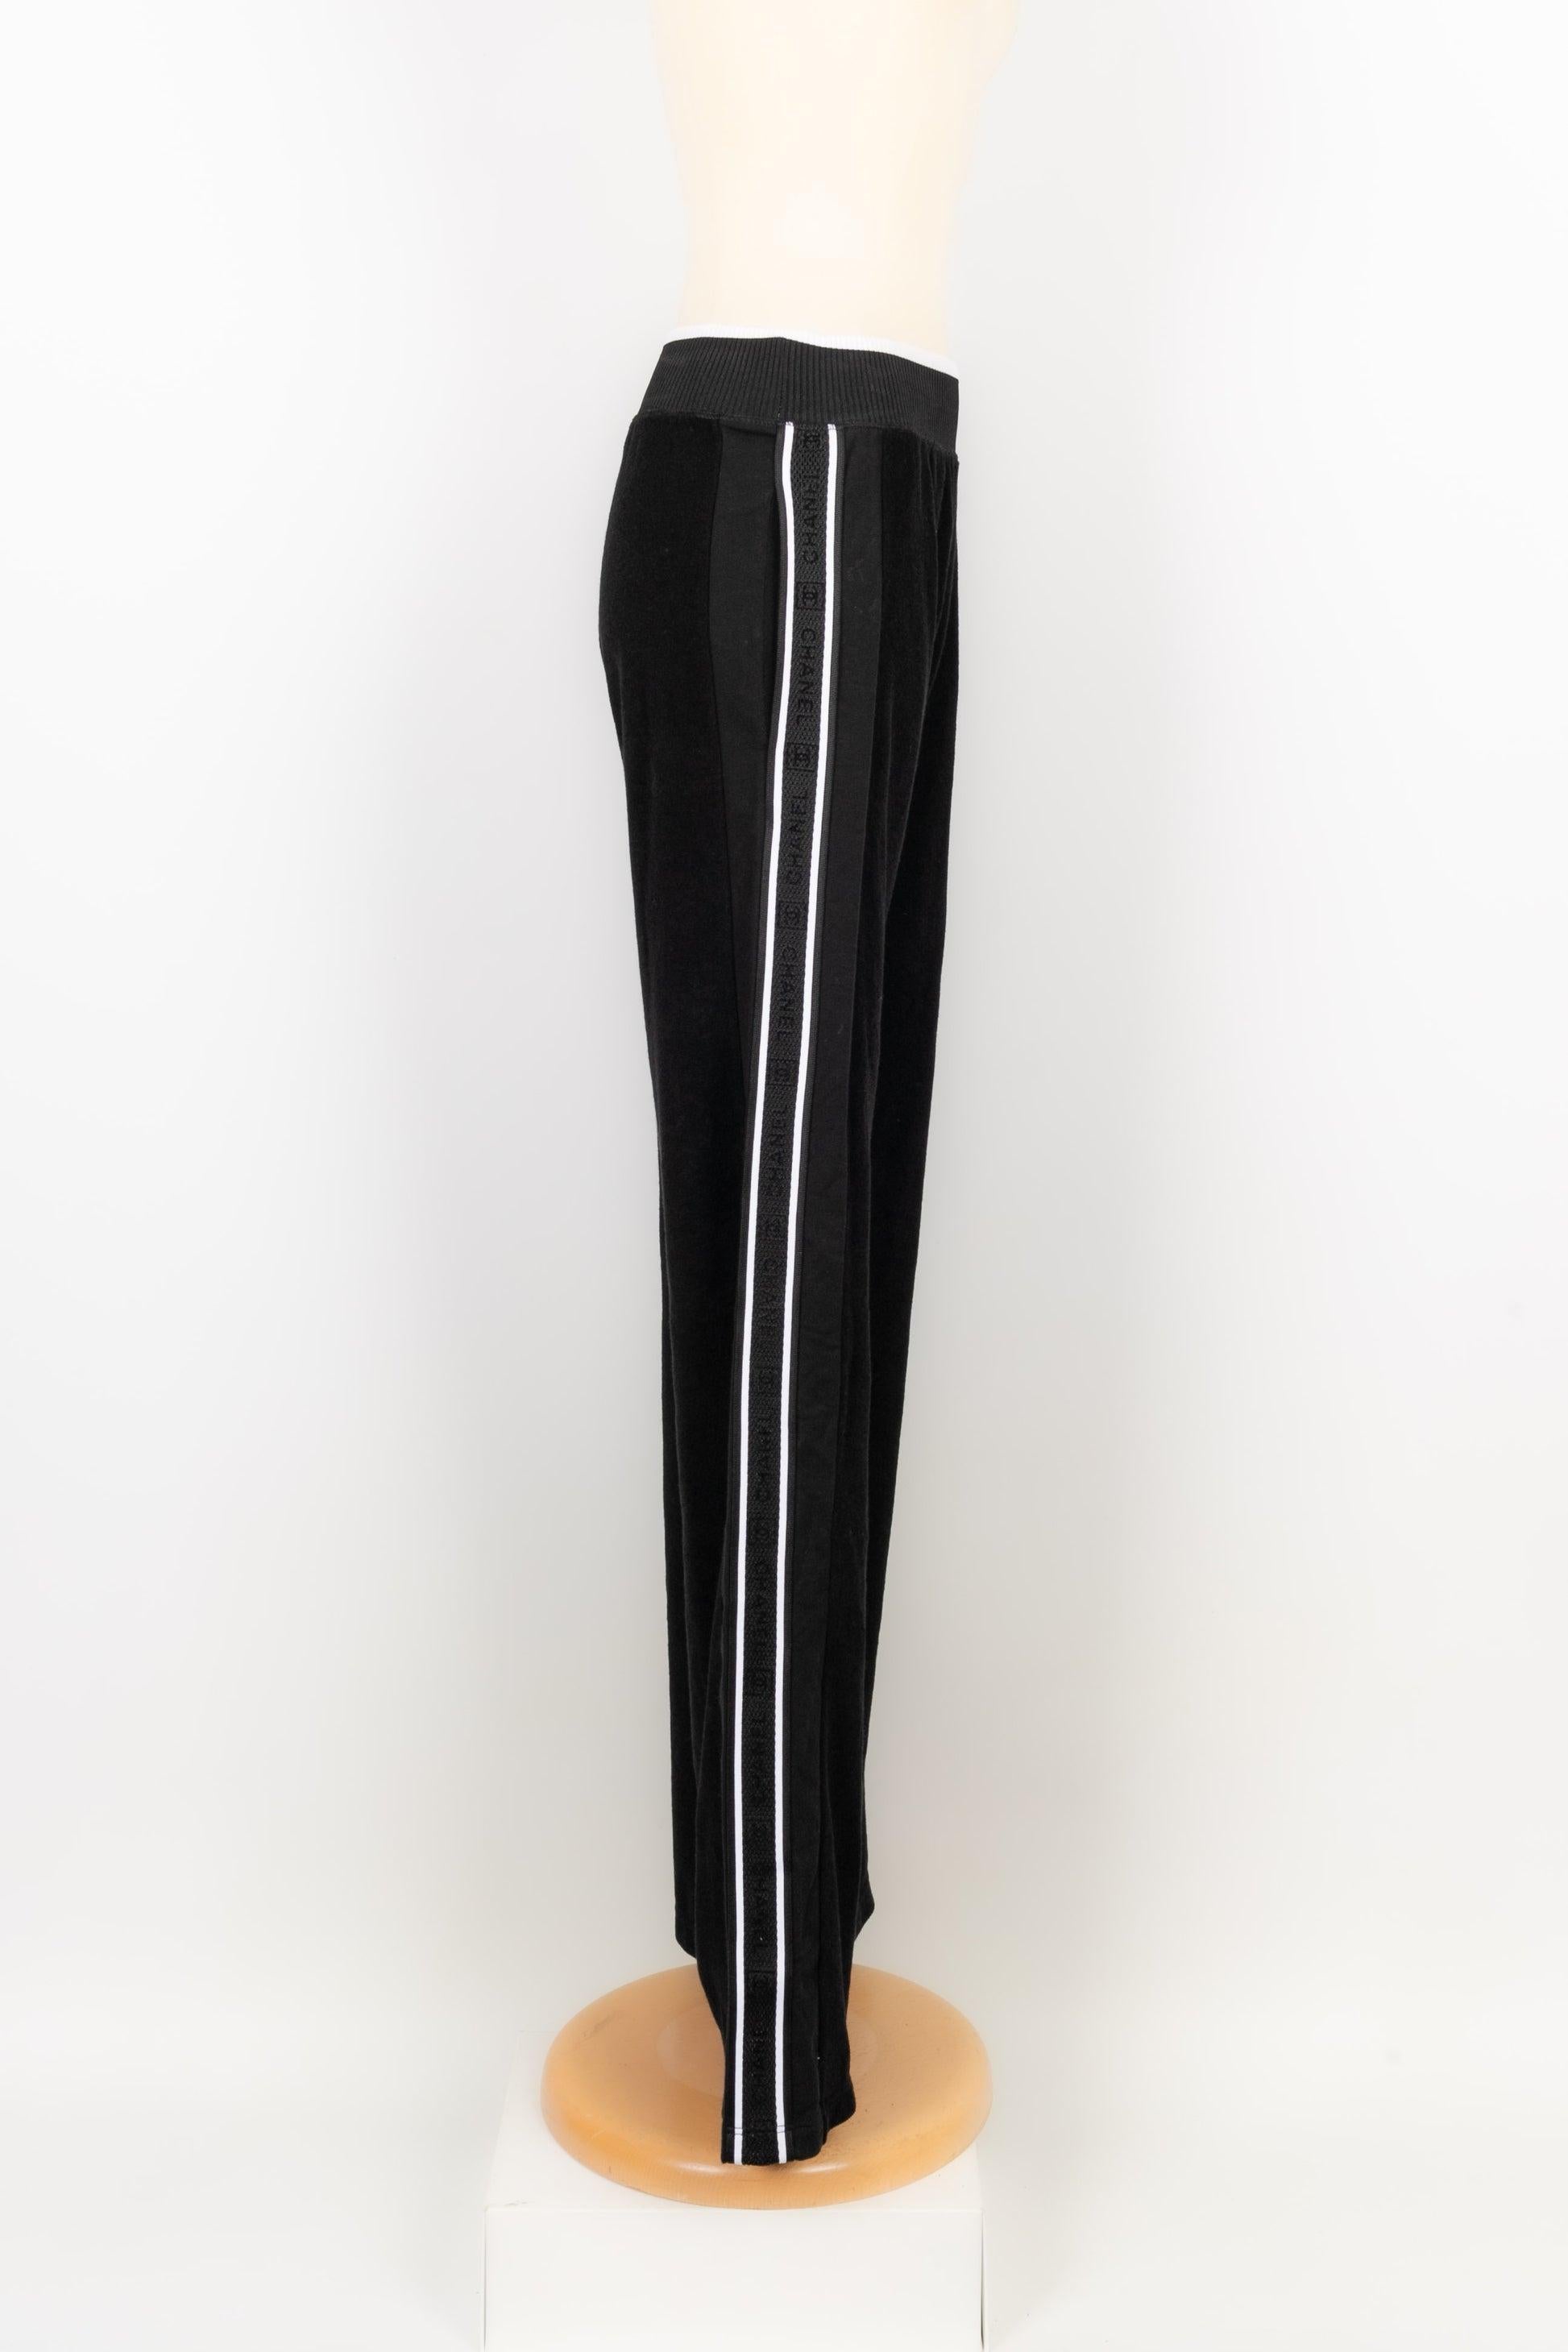 Chanel - Terry cloth pants with an elasticated strip at the waist. No size nor composition label, it fits a 36FR.

Additional information:
Condition: Very good condition
Dimensions: Waist: 30 cm - Length: 110 cm

Seller Reference: FJ15
